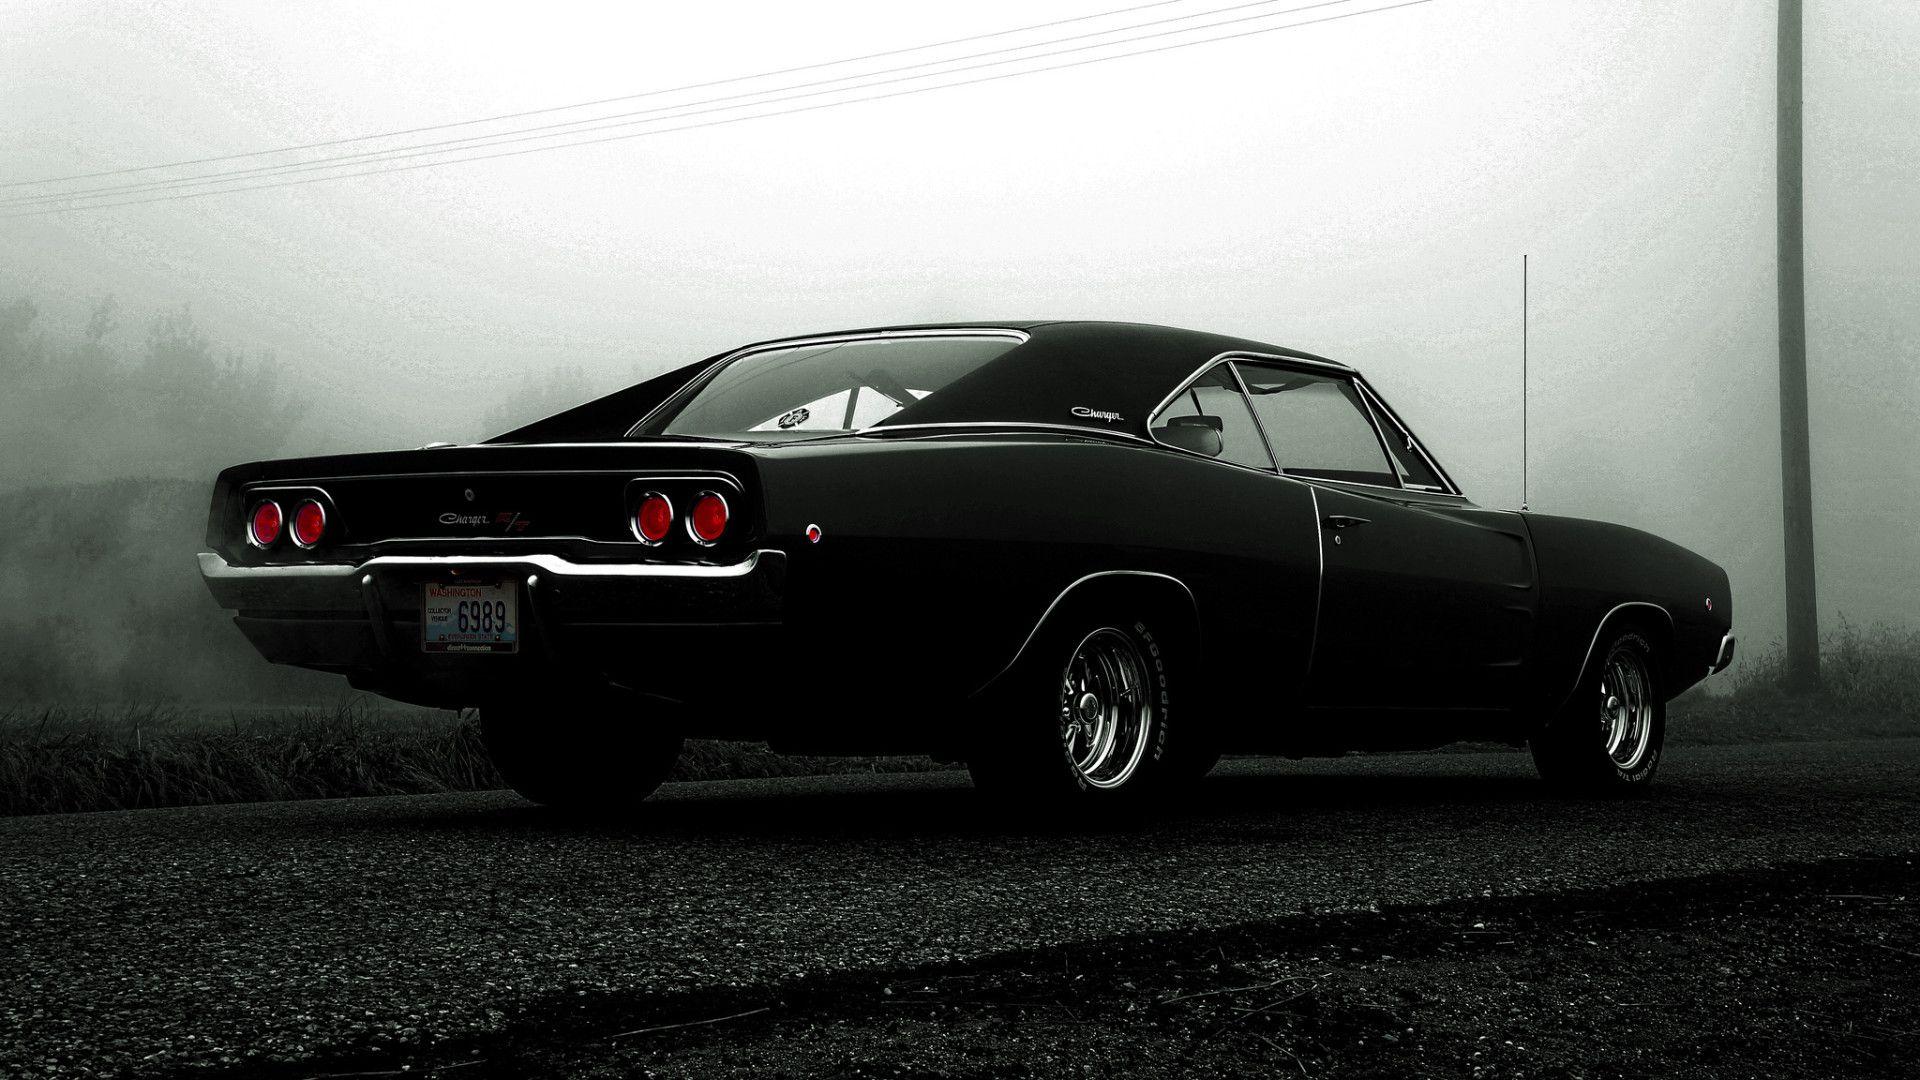 Dodge Charger Wallpaper HD, 43 High Quality Dodge Charger HD